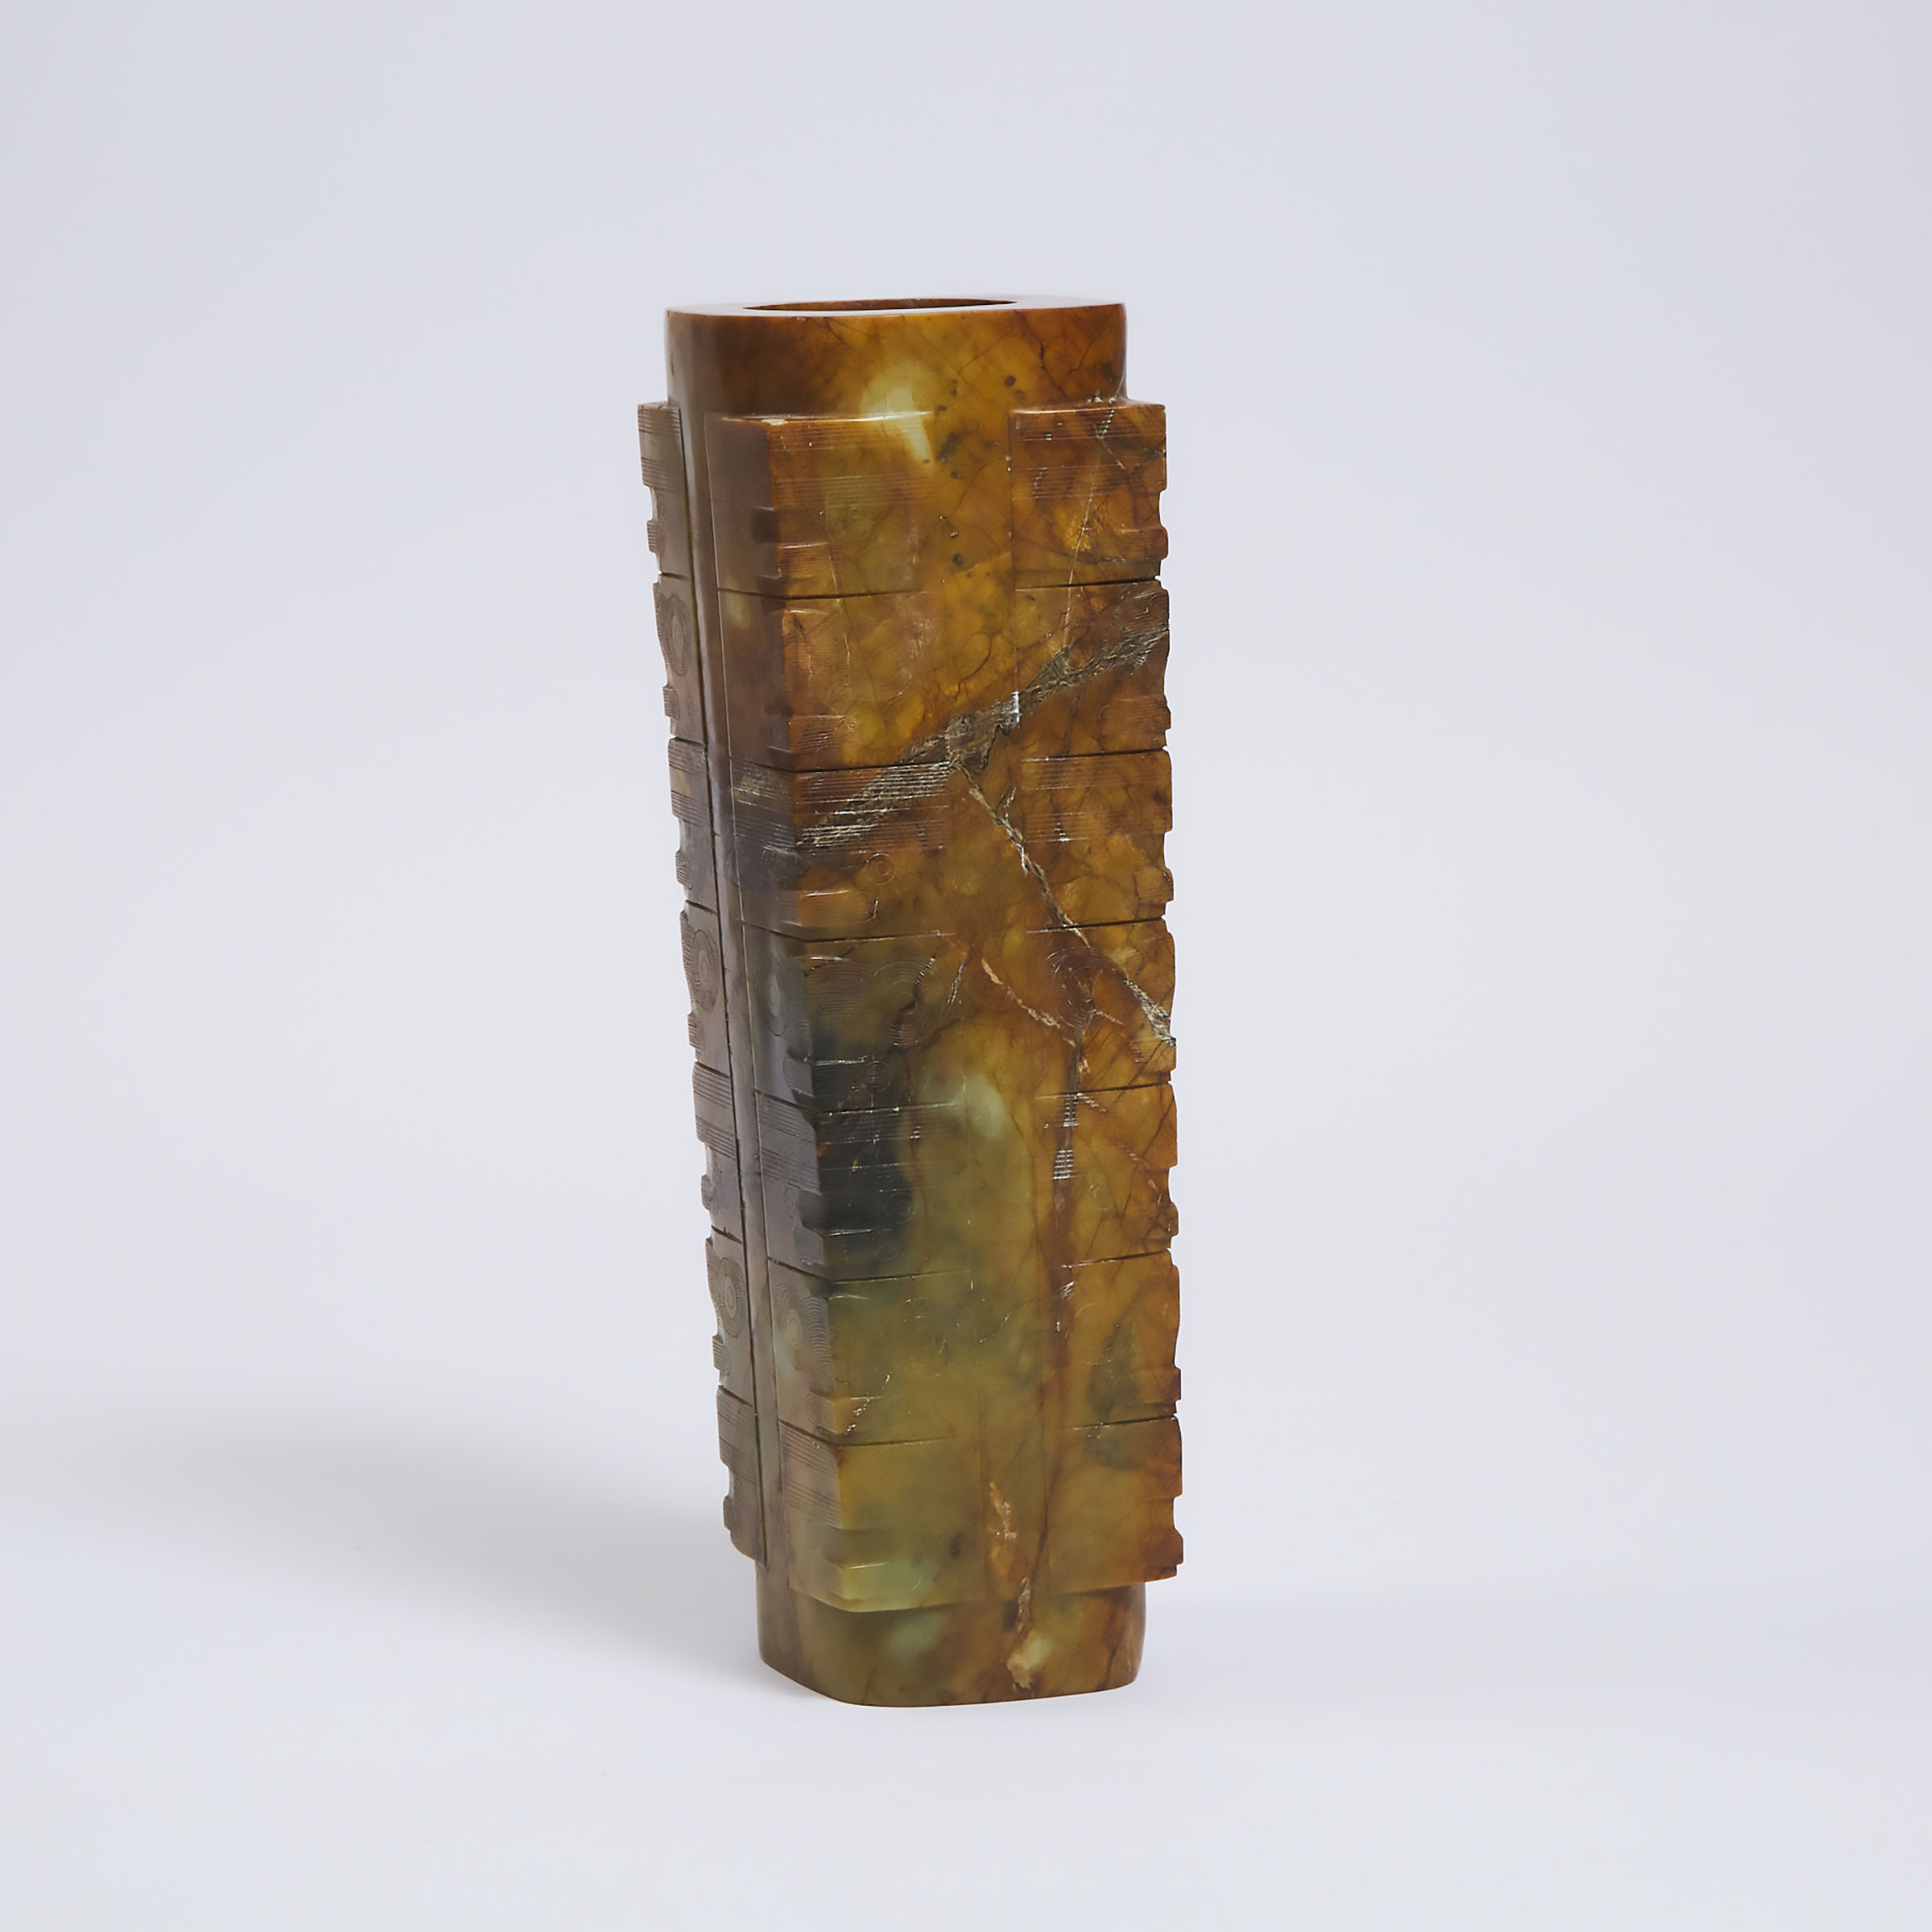 A Large Neolithic-Style Seven-Tiered Yellow and Russet Jade Cong, Ming Dynasty or Later